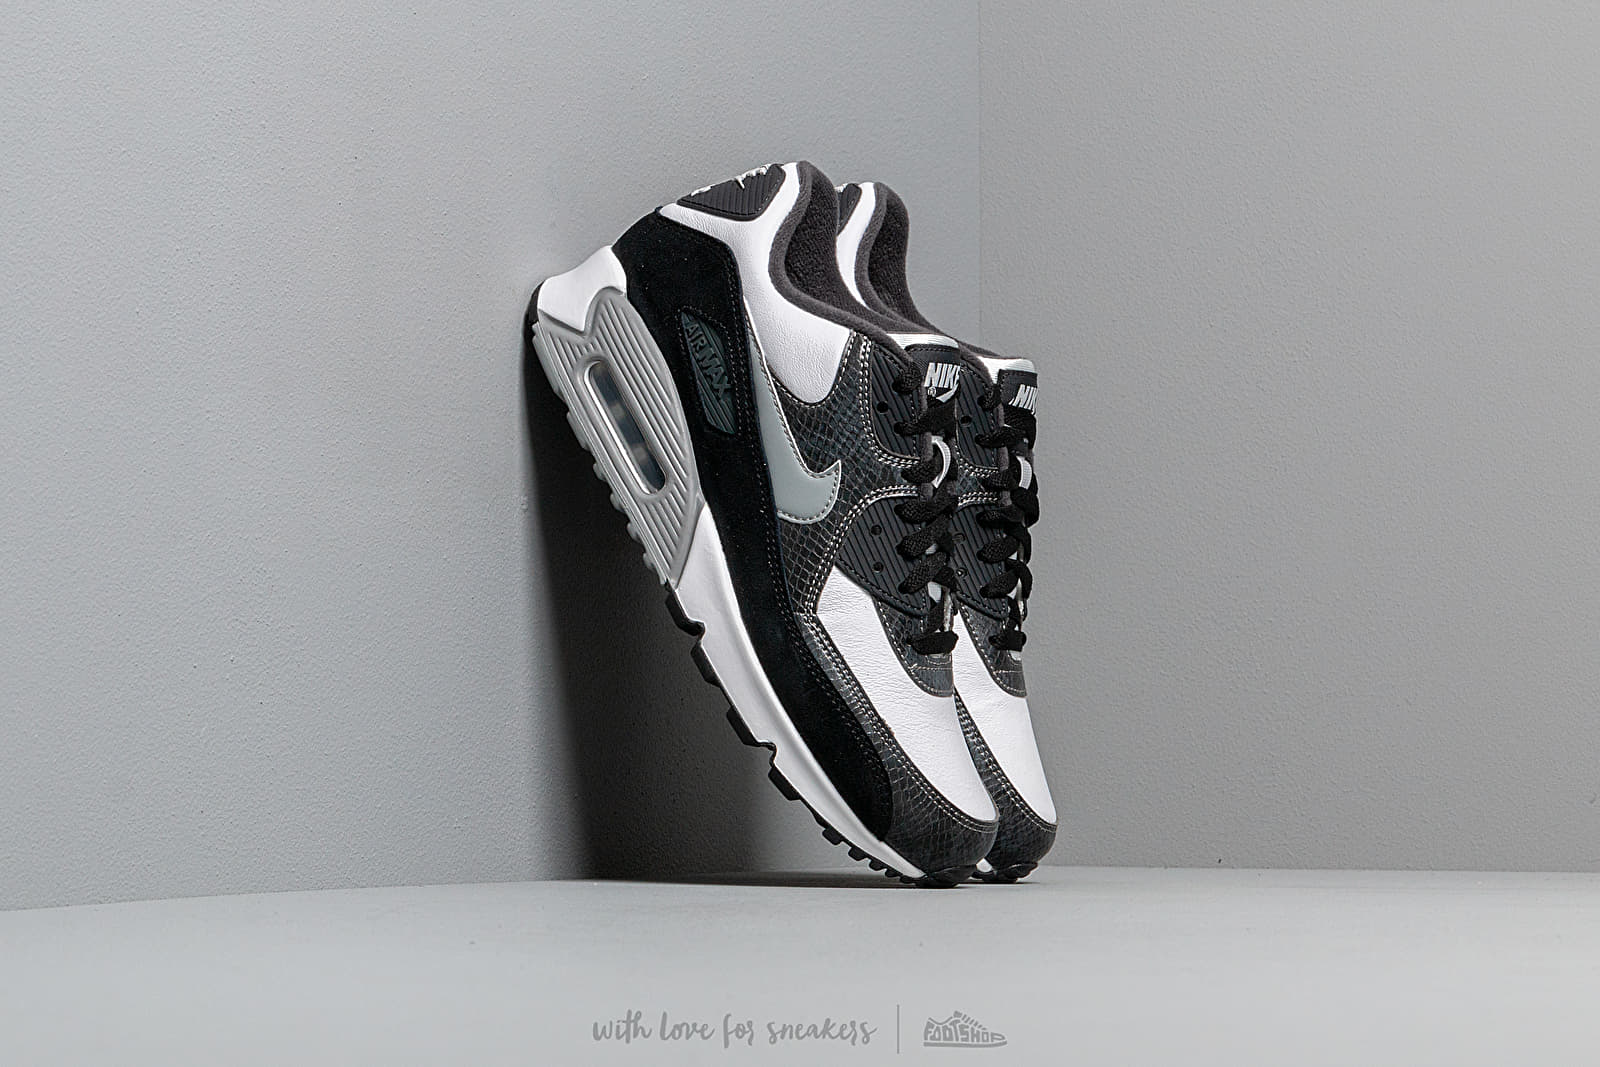 Pánske tenisky a topánky Nike Air Max 90 Qs White/ Particle Grey-Anthracite